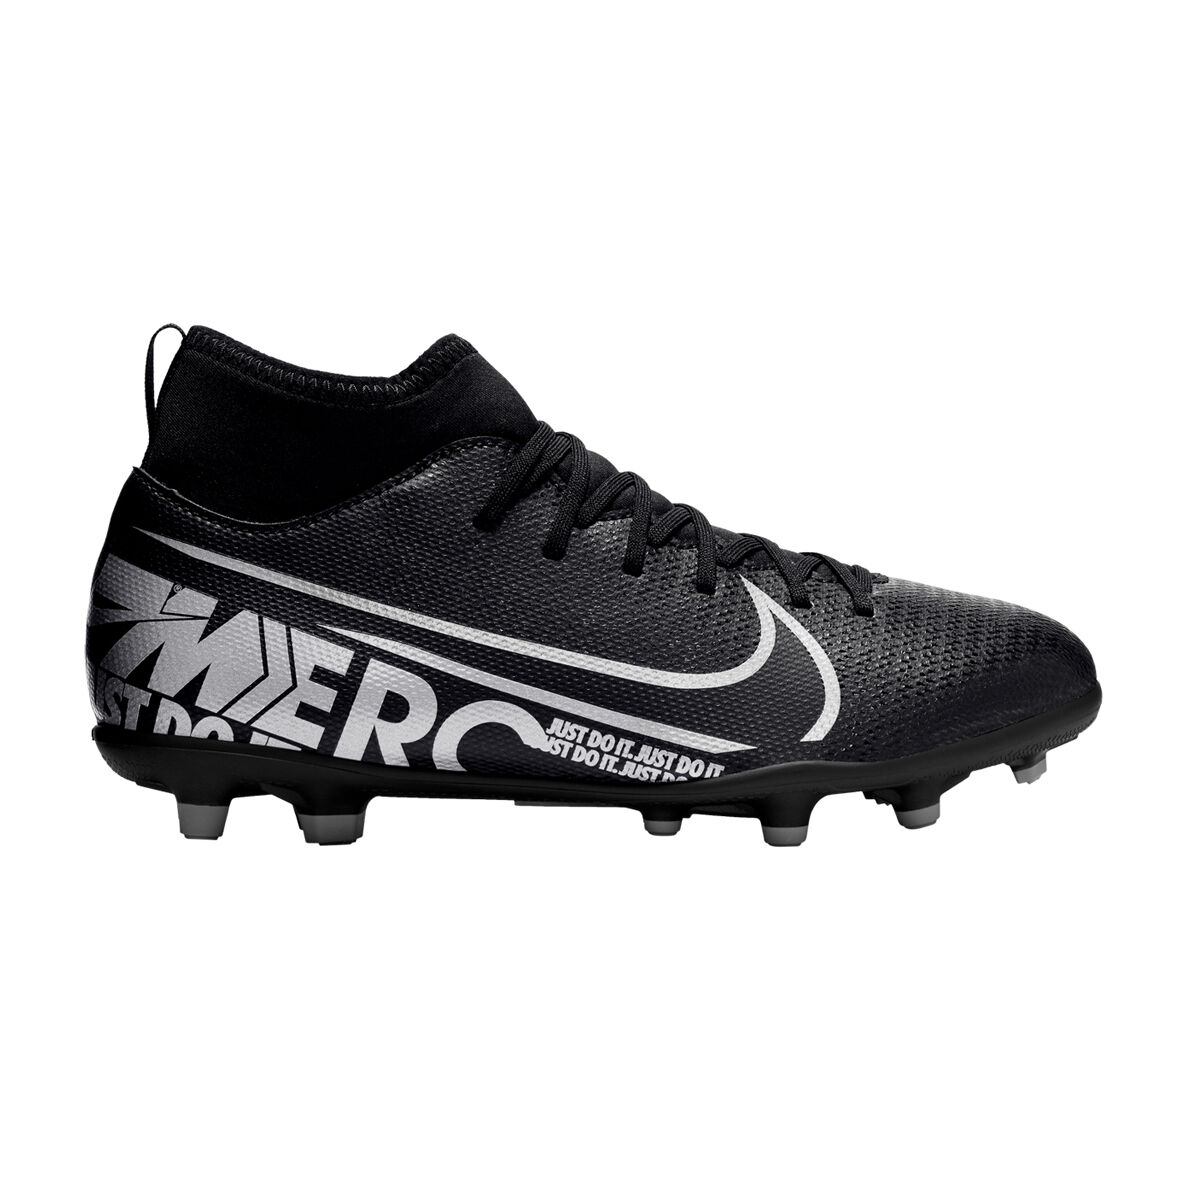 Nai Nike Men 's Shoes and Sacker Mercurial Superfly 6 Pro.